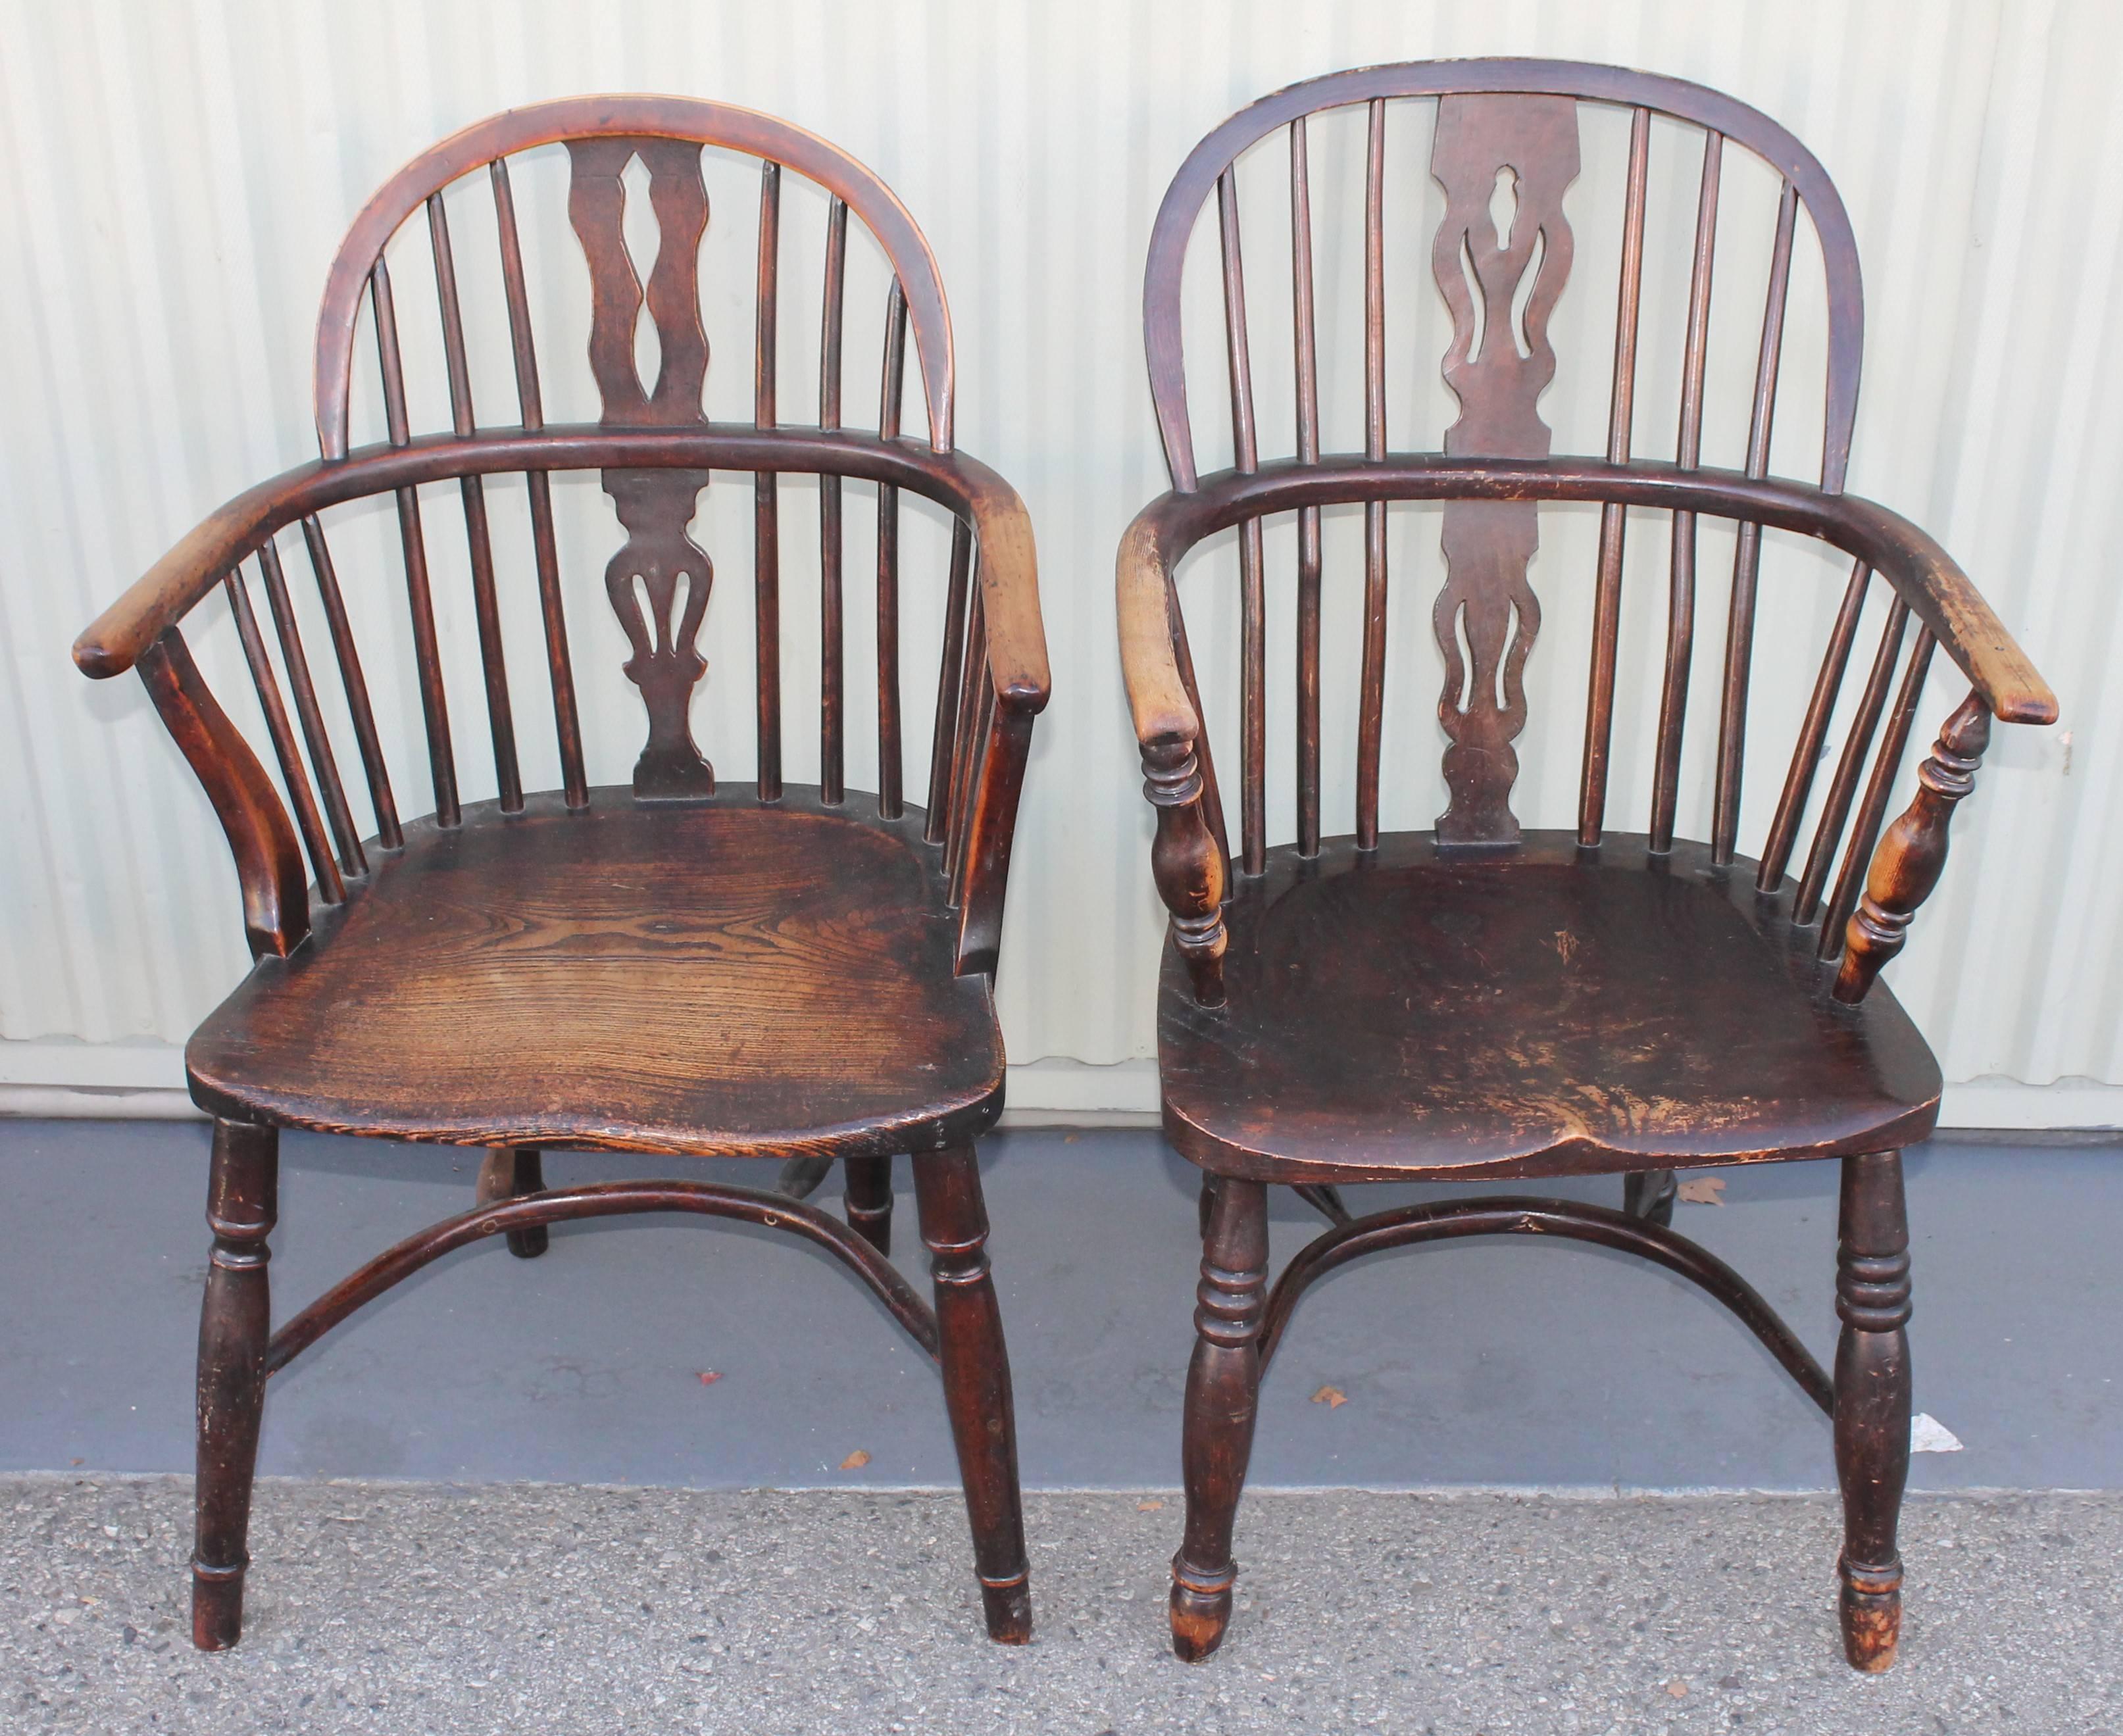 Hand-Crafted Windsor Chairs, Early 19th Century English Assembled Collection / 4